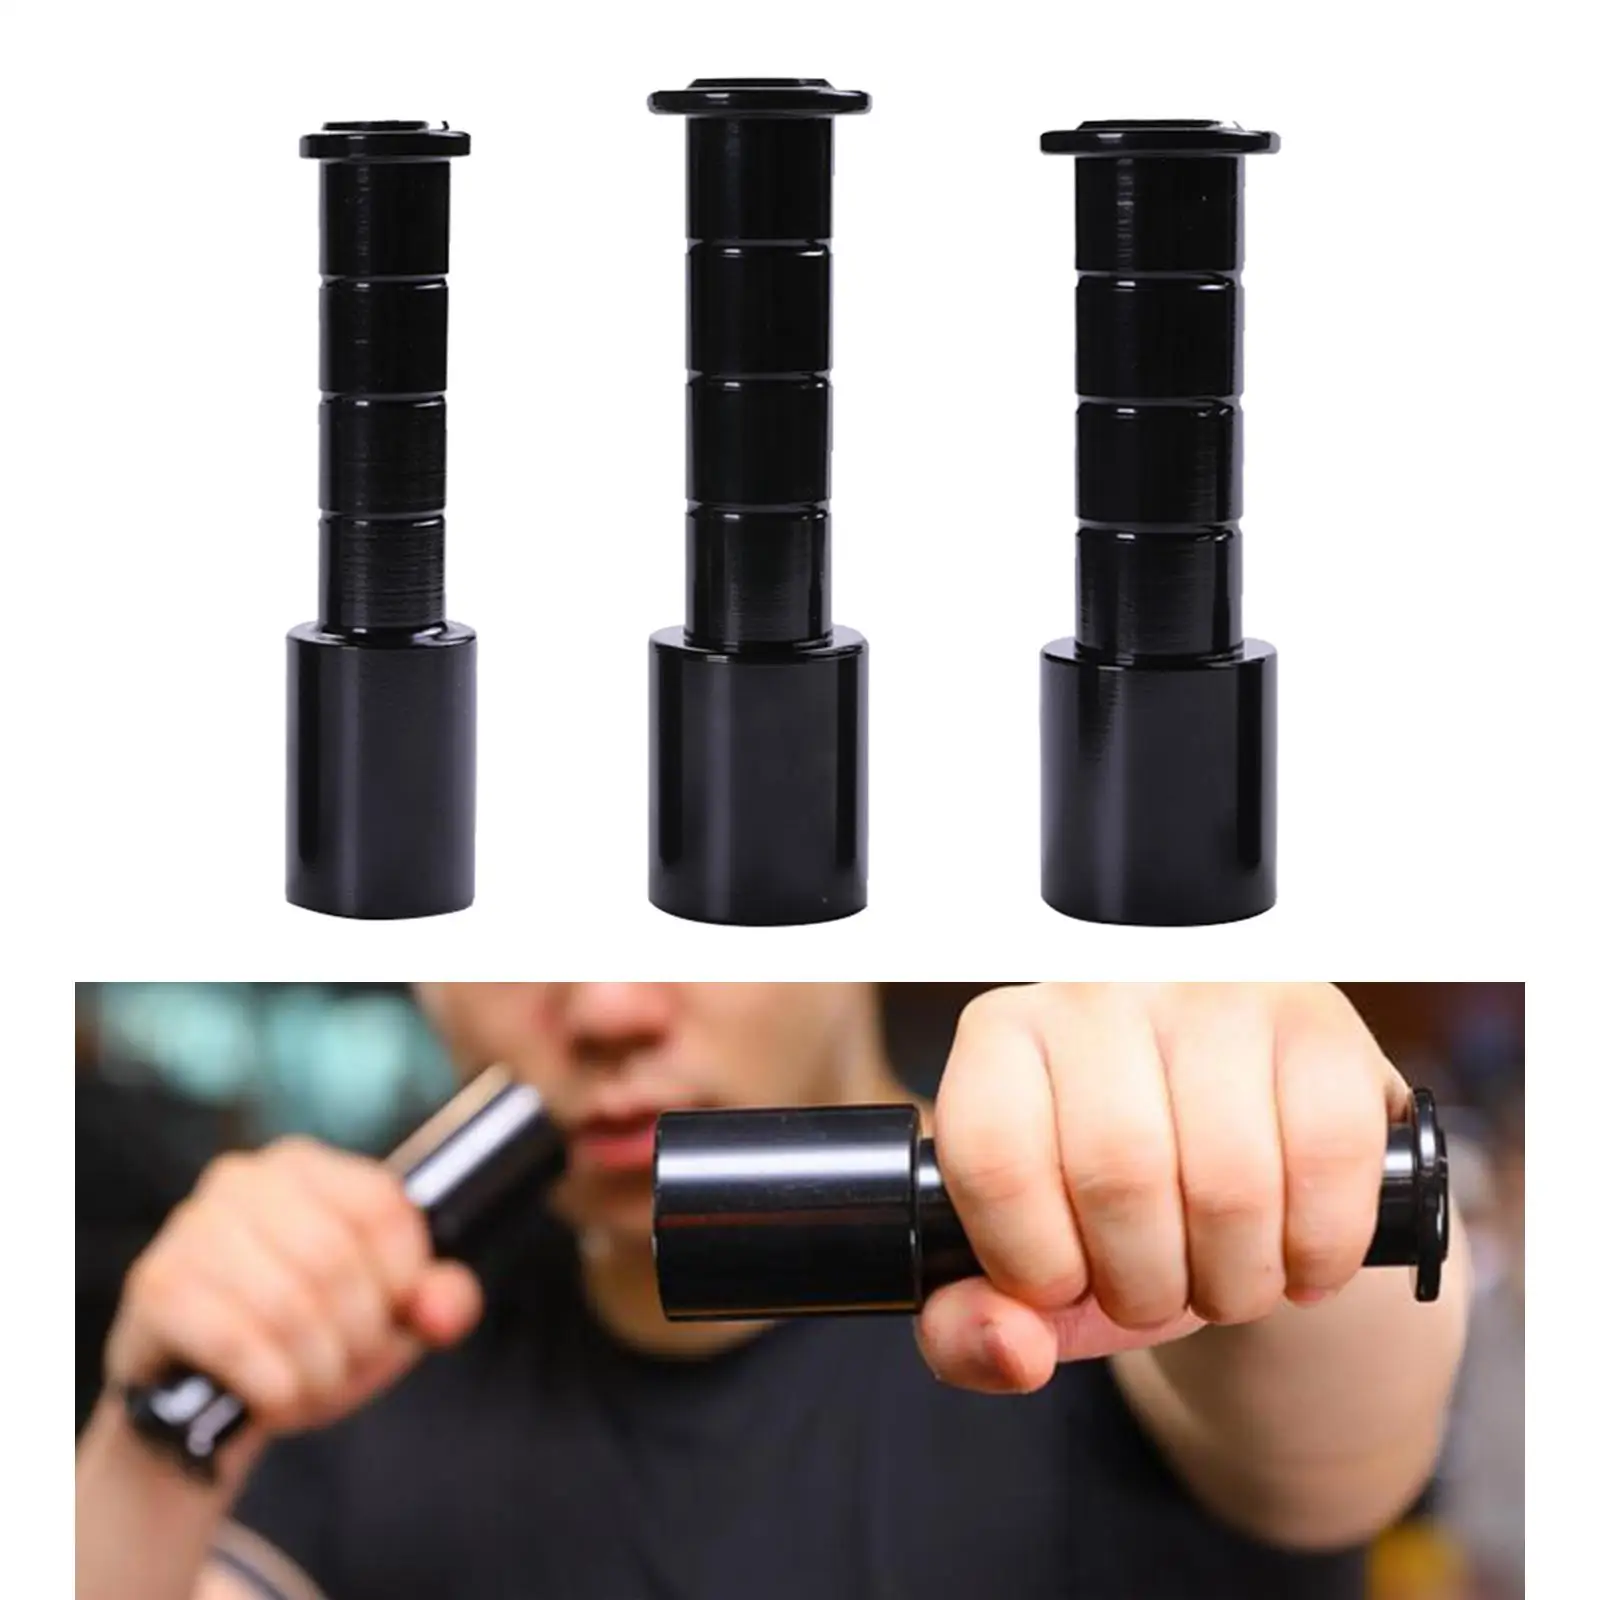 Hand Weight Anti Slide Grip Training Equipment Trainer Muscle Weight Lifting Boxing for Exercise Home Gym Kickboxing Yoga Cardio